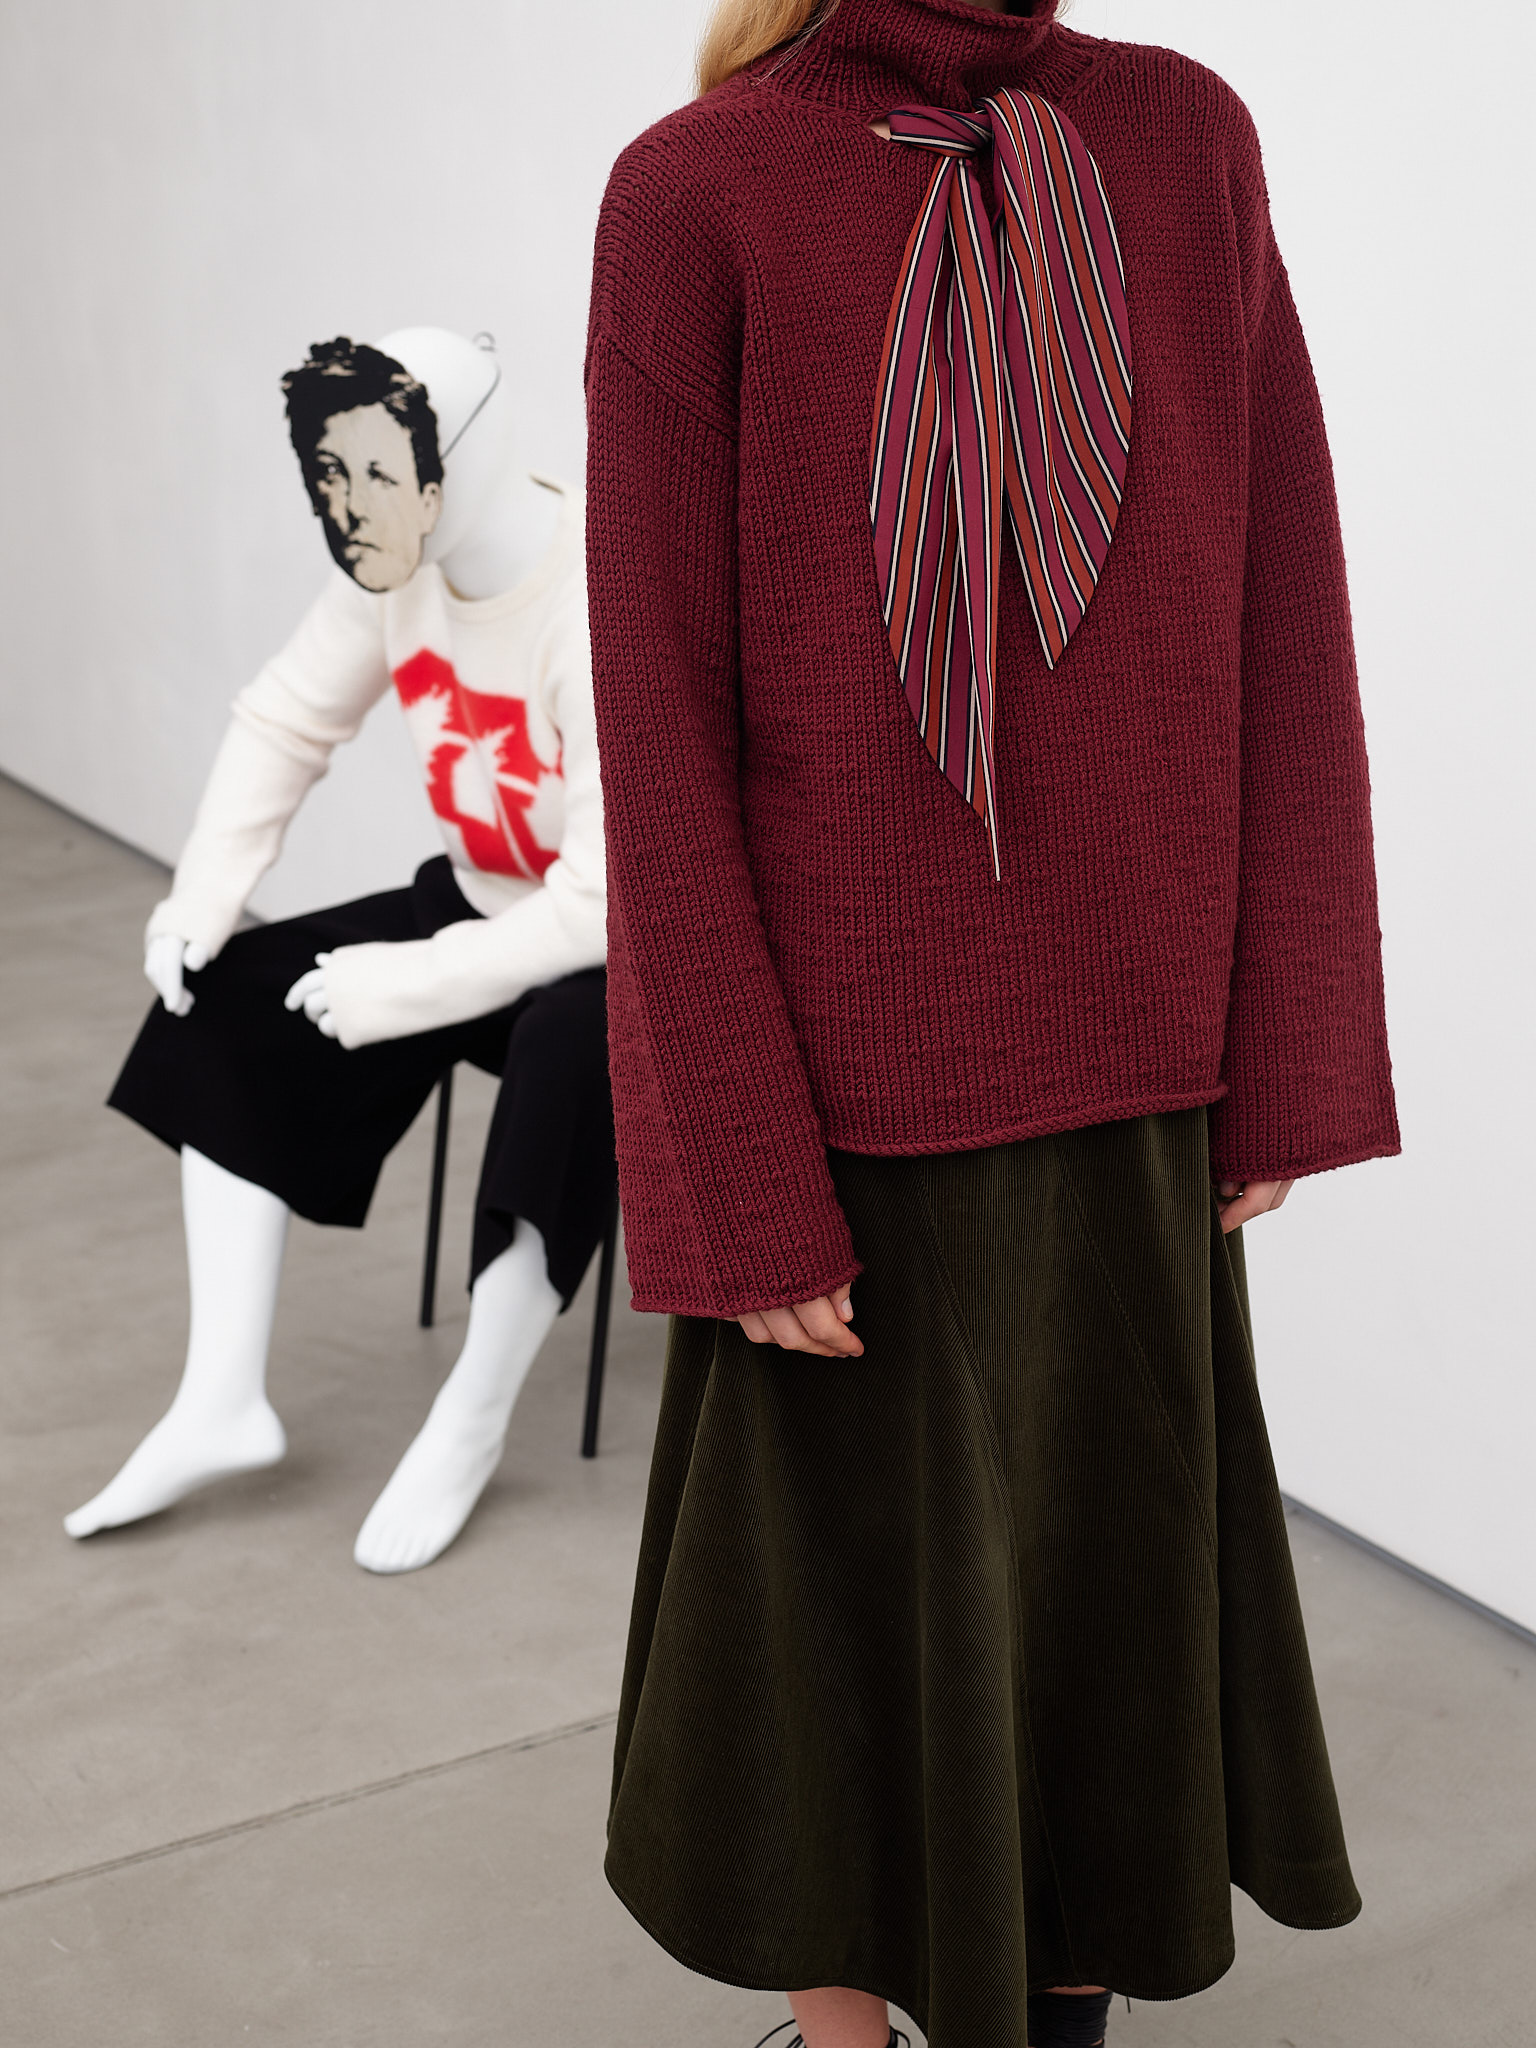 JW Anderson Pre-Fall 2020 — Photographs by Lewis Ronald